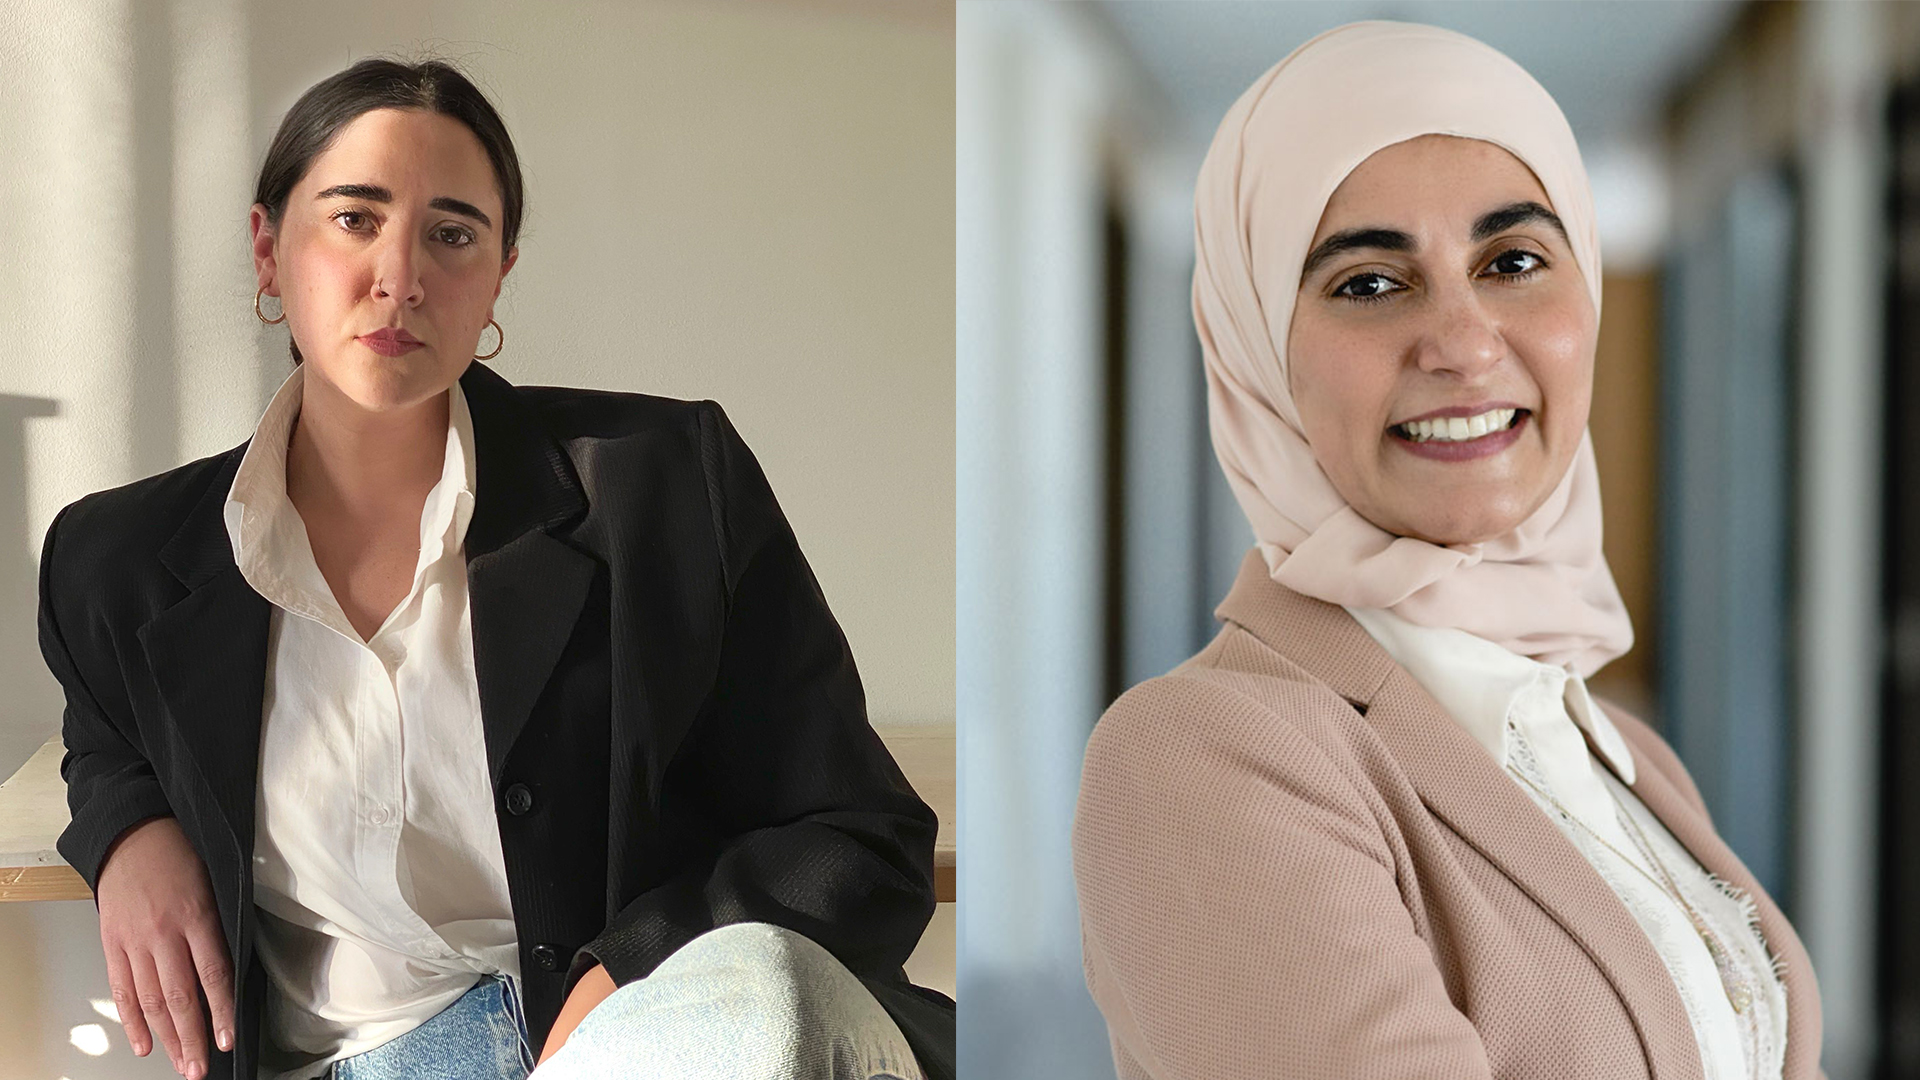 Nour Emam (L) and Dr. Deemah Saleh (R) run Instagram accounts where they share information on intimate female health. (Supplied)